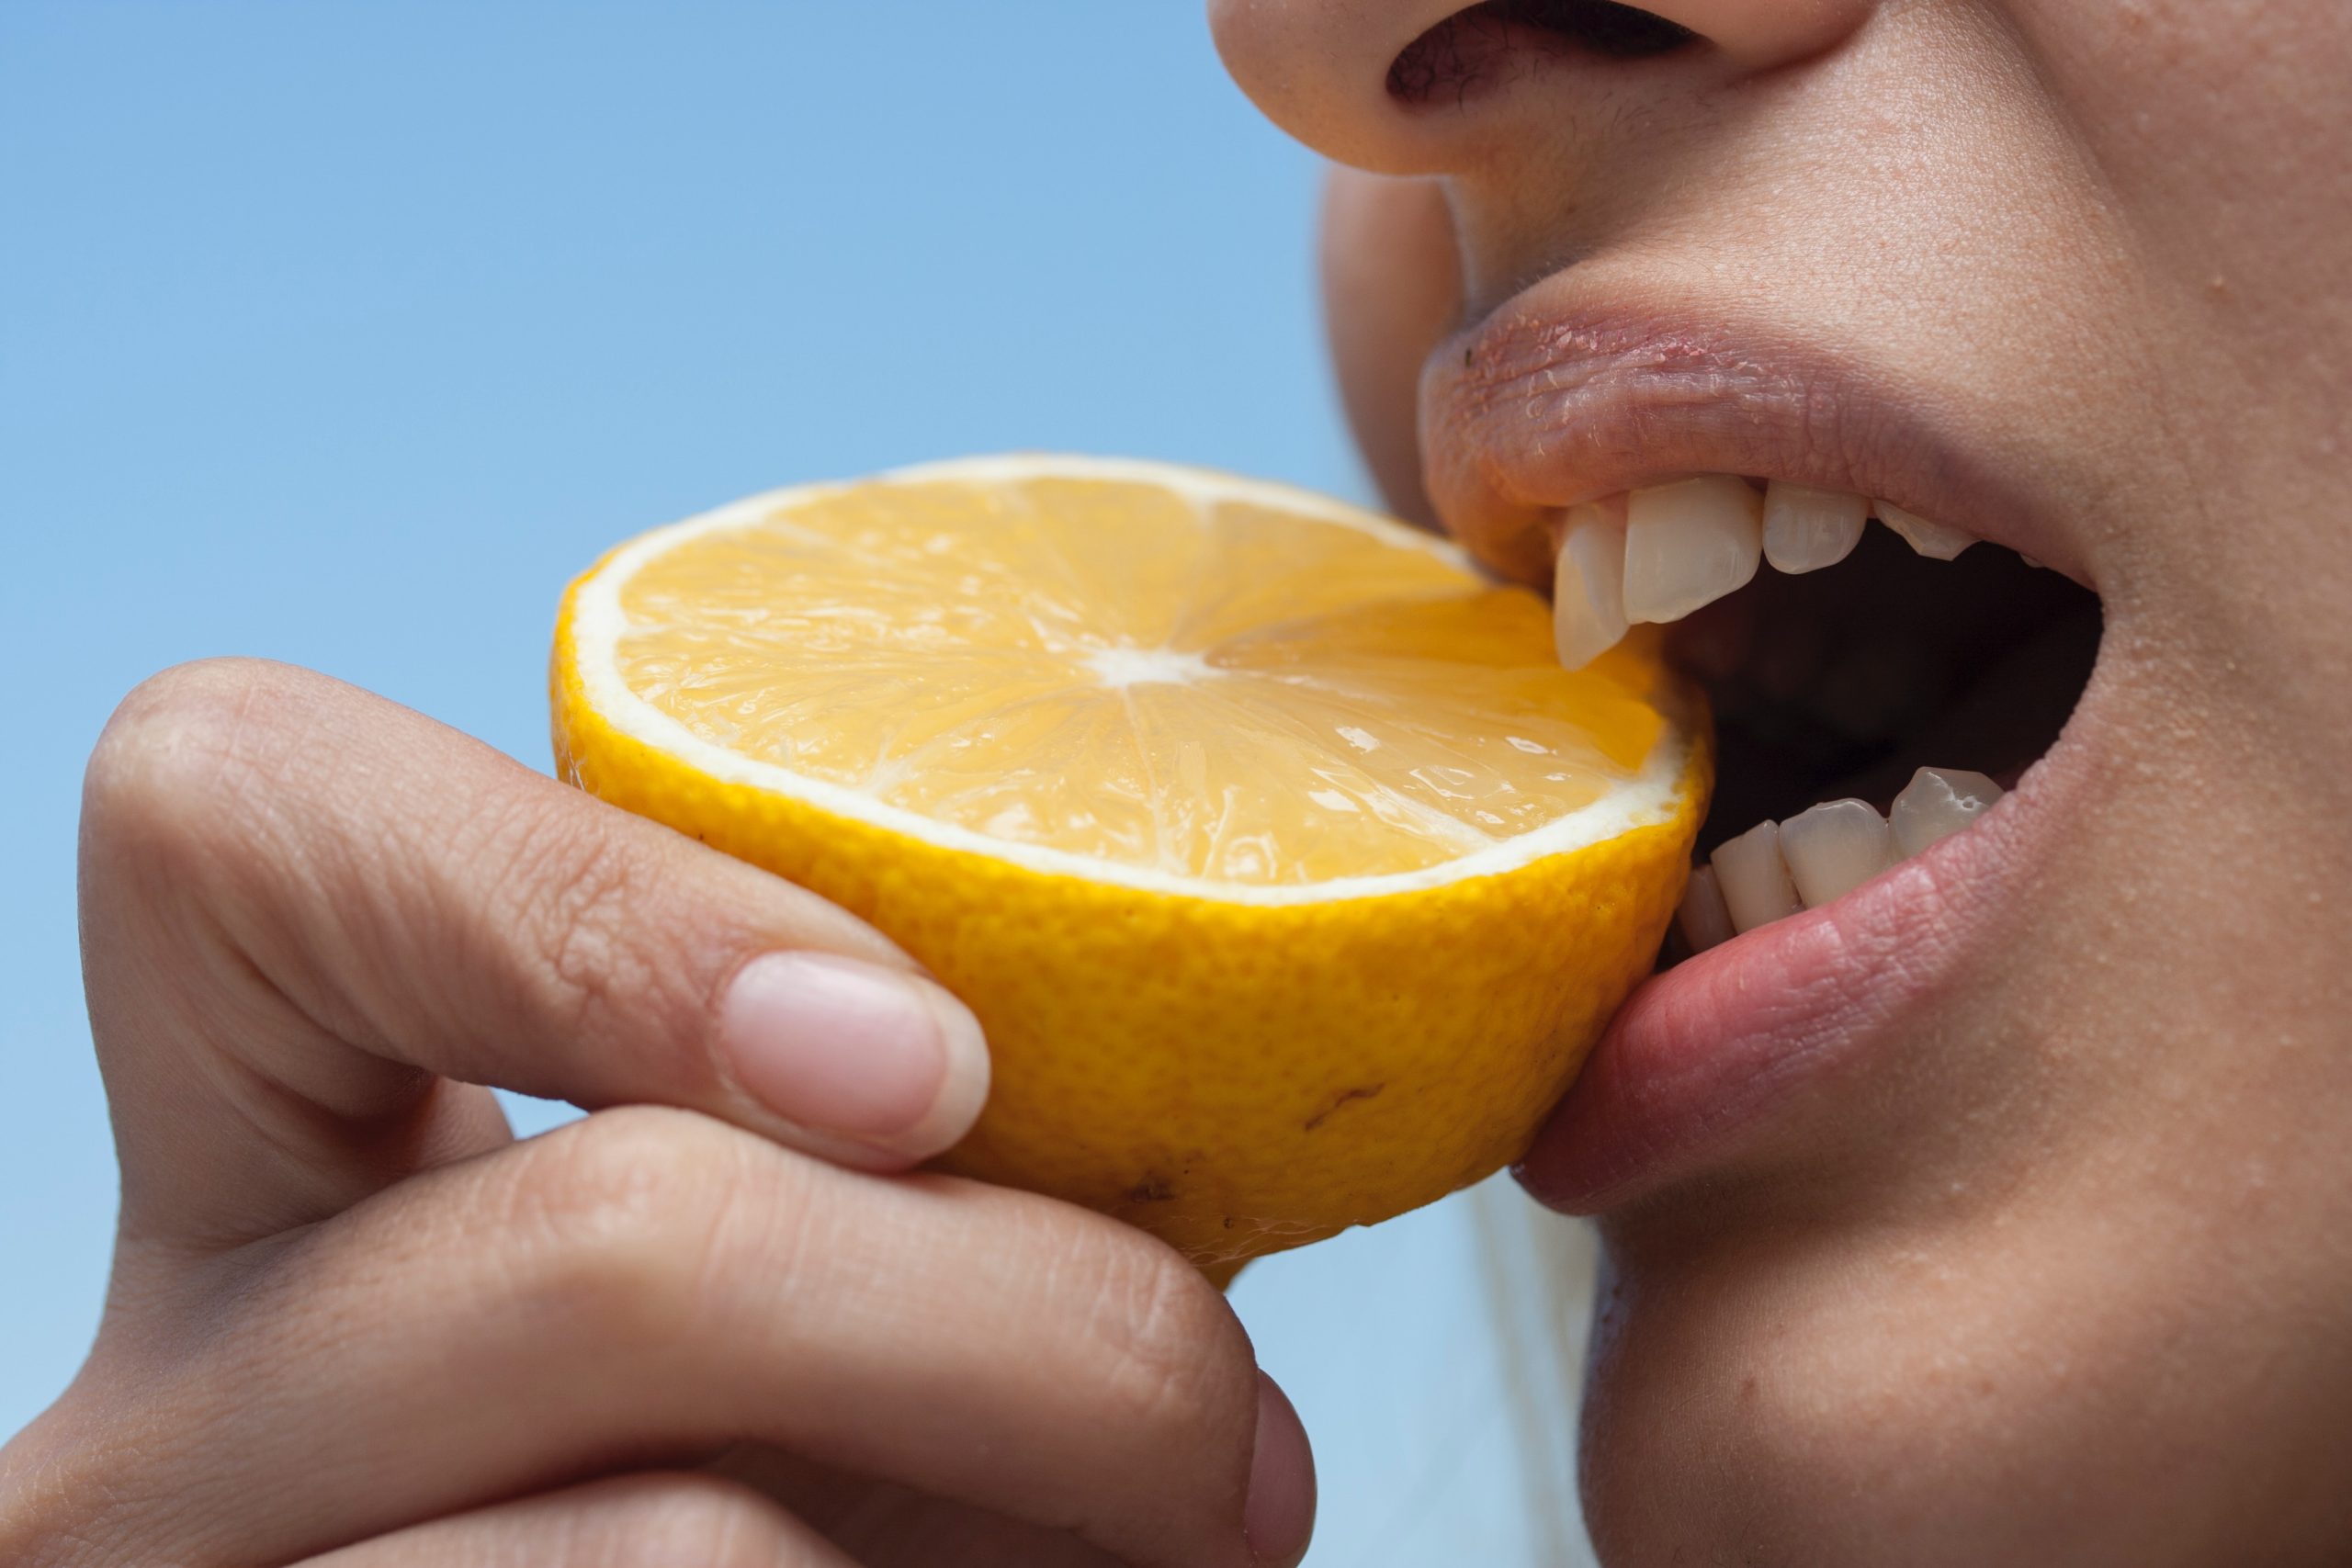 person chewing lemon